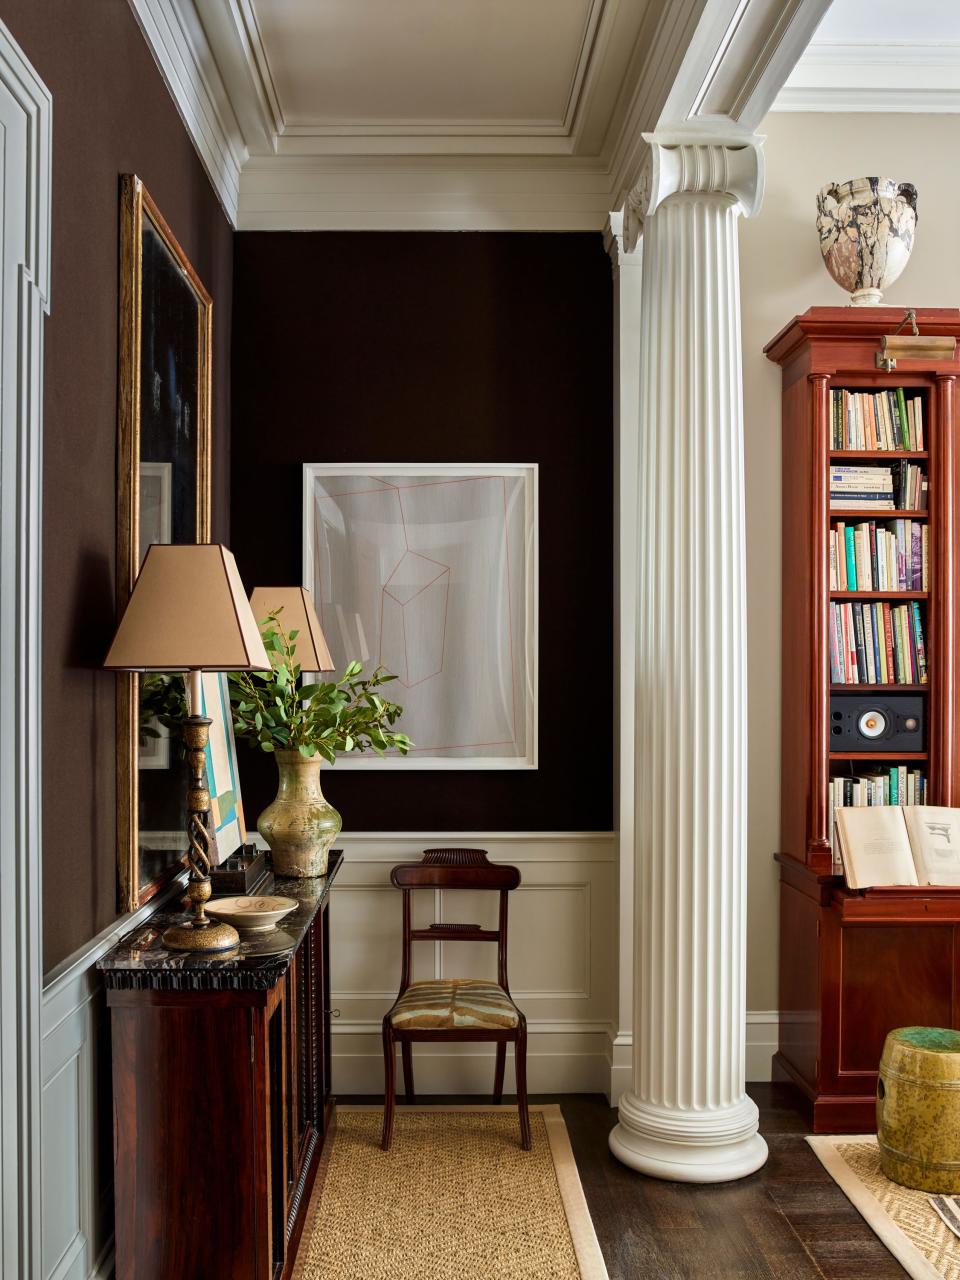 A nook off the living room features a Regency mahogany cabinet from Niall Smith Antiques, a mahogany side chair from Sutter Antiques, and original artwork by Maine artist Corey Daniels. The Kashmiri lamps are from Robert Kime, and the marble urn was acquired at an auction at Christie’s.